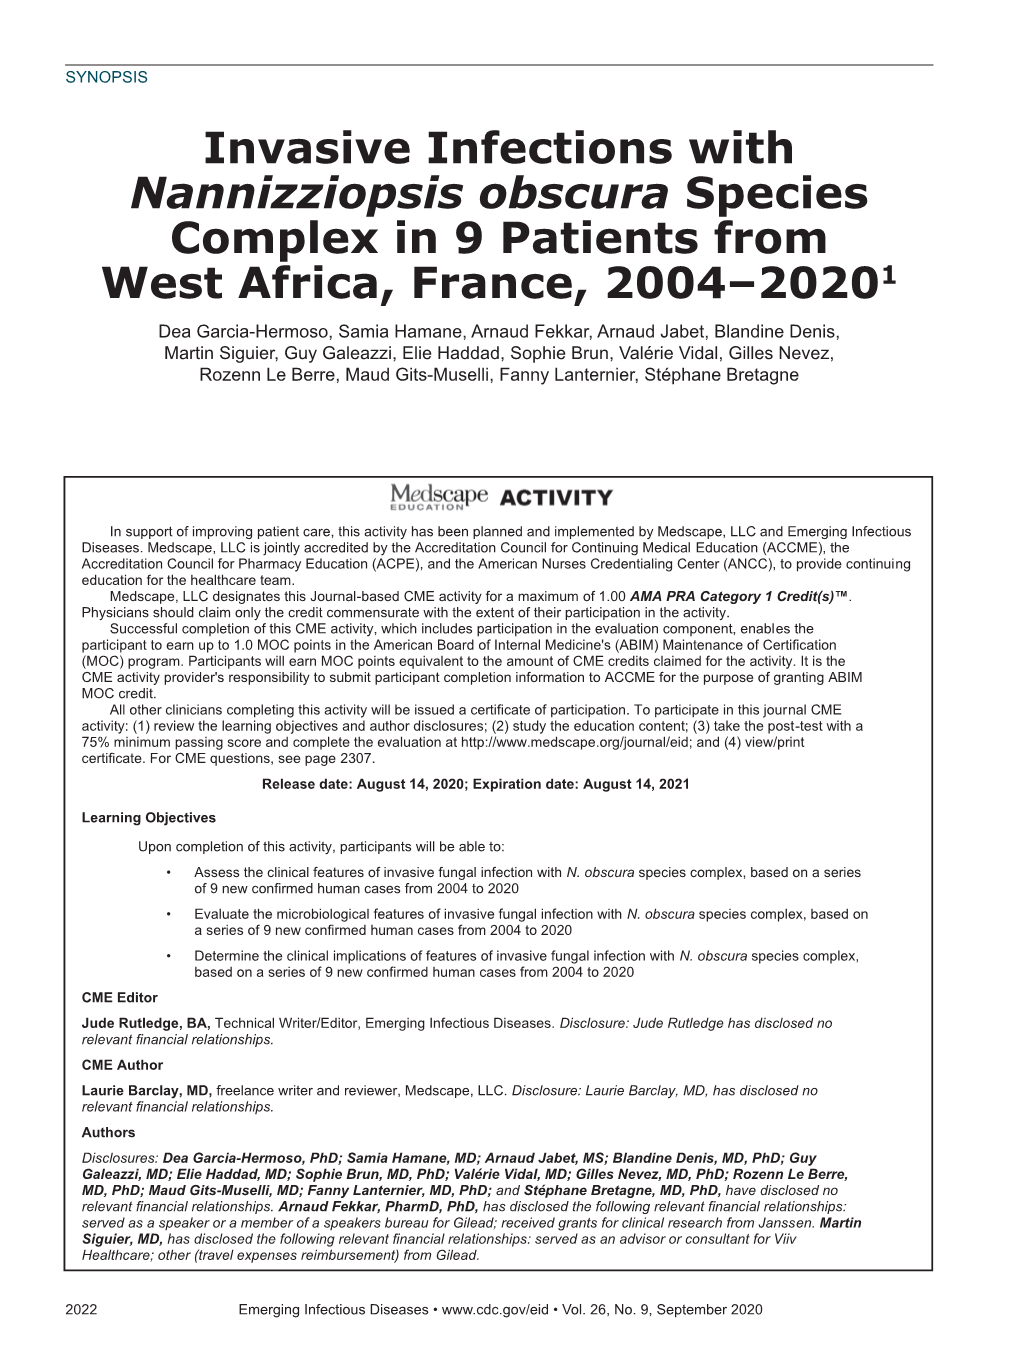 Invasive Infections with Nannizziopsis Obscura Species Complex in 9 Patients from West Africa, France, 2004–2020